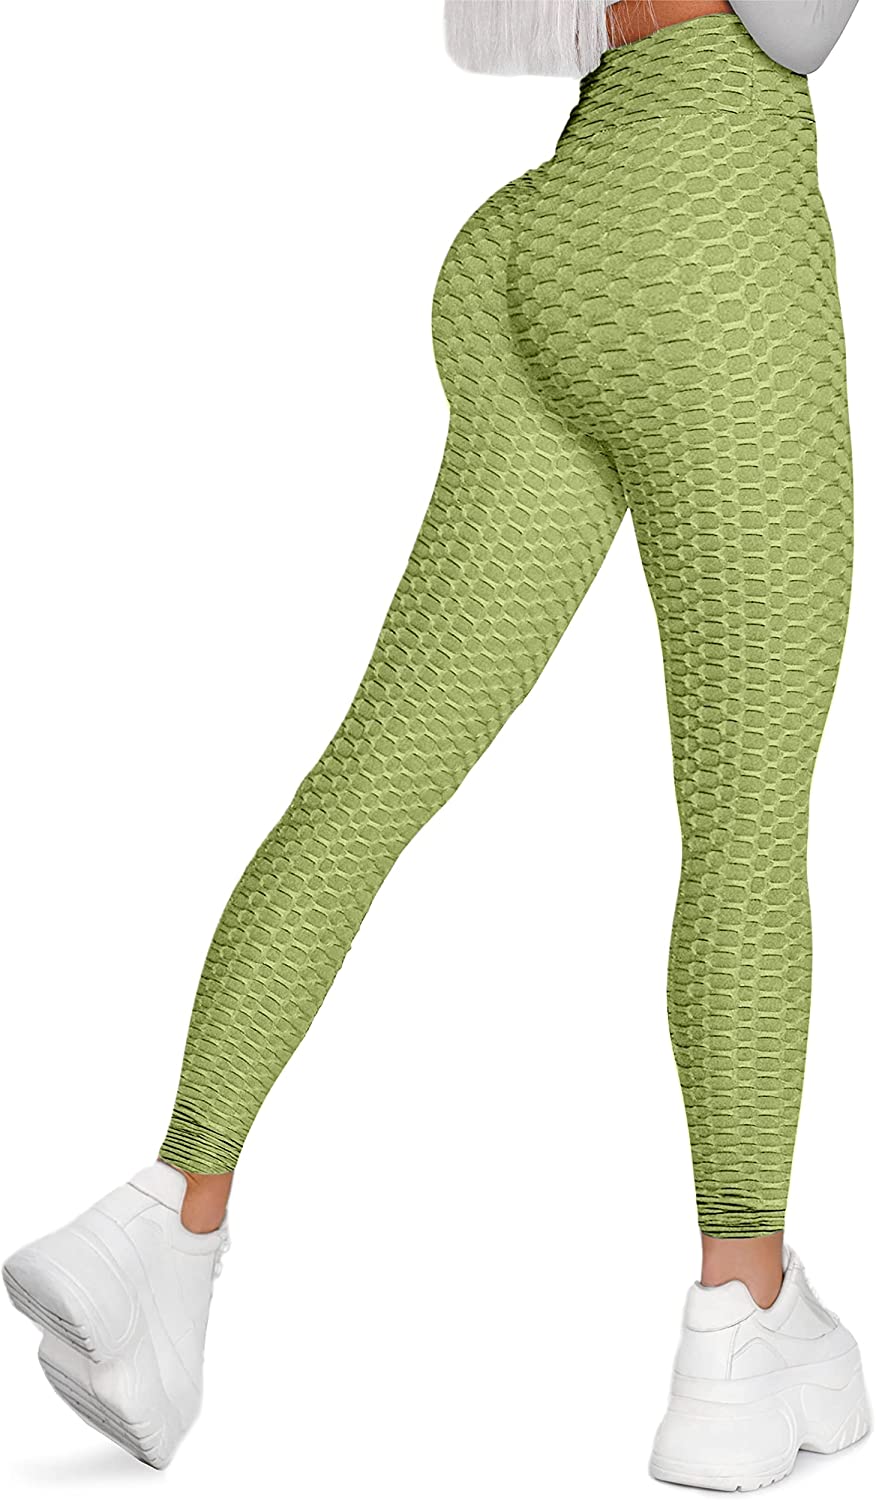 Women's High Waist Active Stretch Workout Yoga Pants - Tummy Control Anti  Cellul